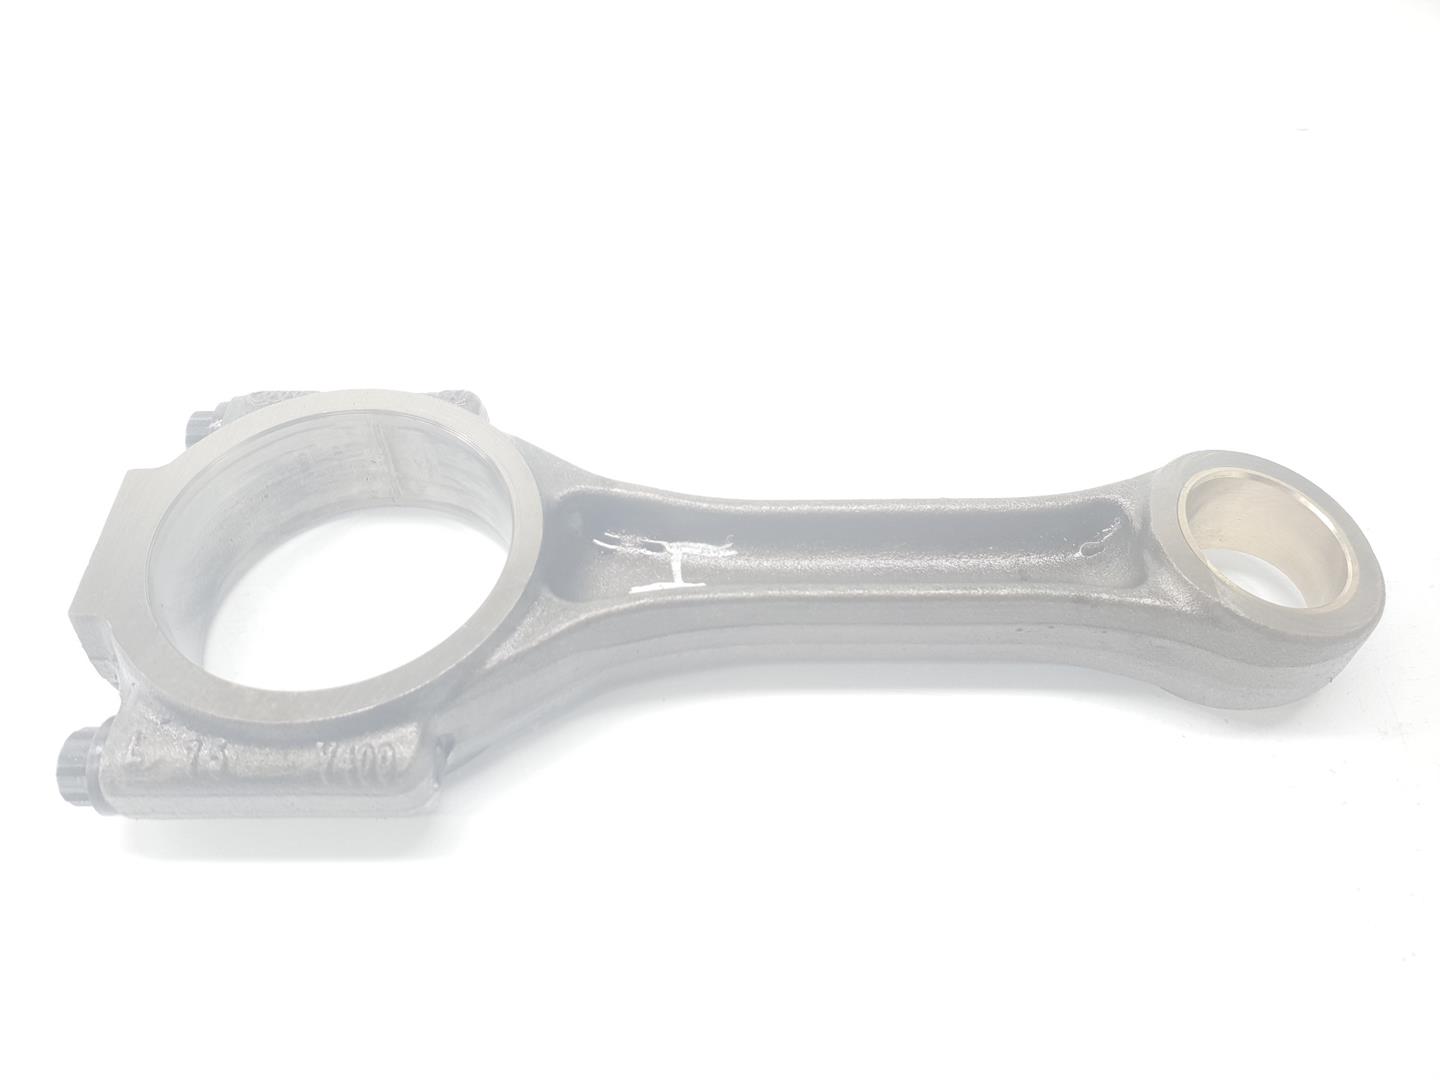 SEAT Exeo 1 generation (2009-2012) Connecting Rod 038198401F, 038198401F, 1111AA 22601989